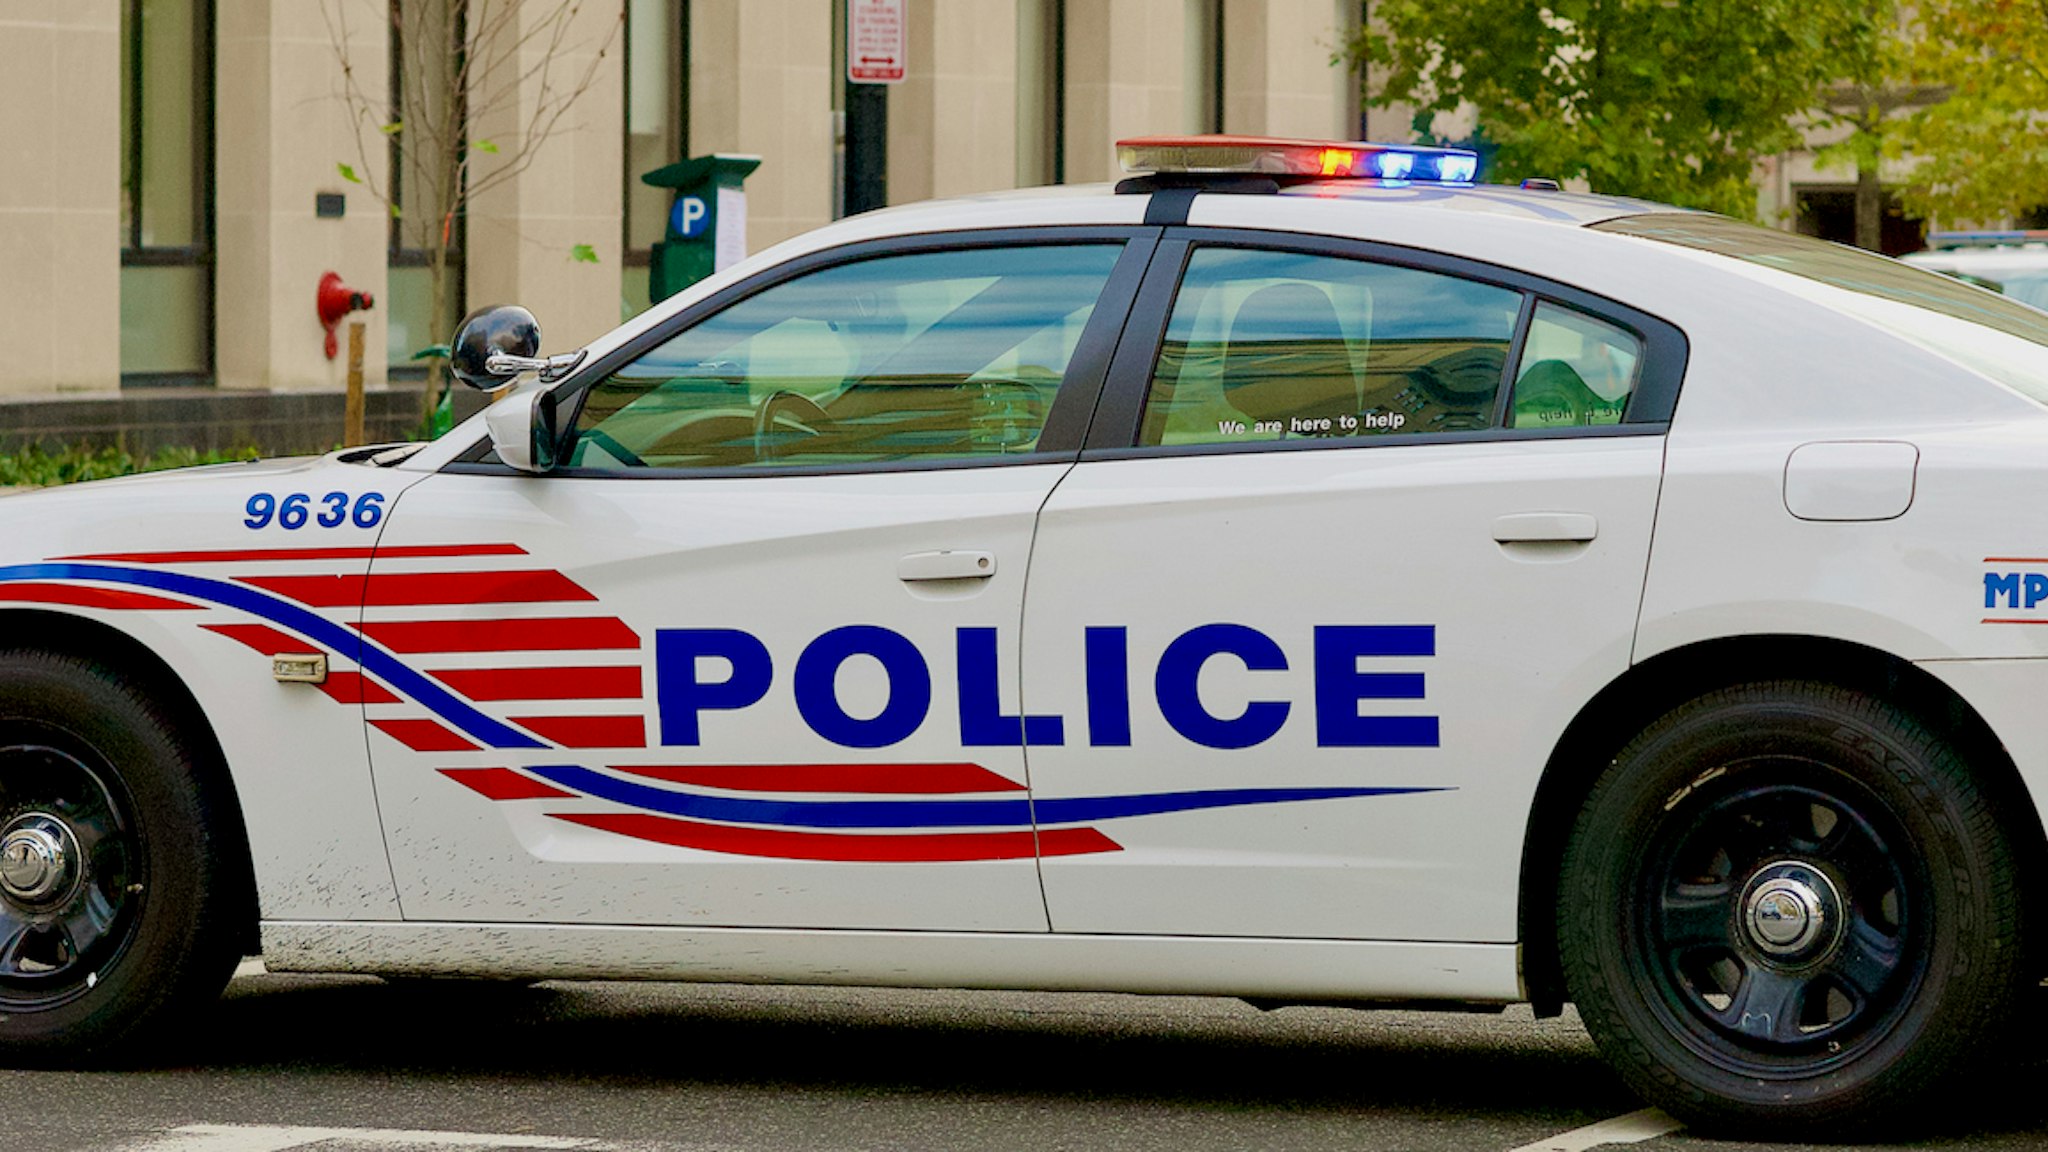 A D.C. Metropolitan Police Department police cruiser / John M. Chase / Getty Images